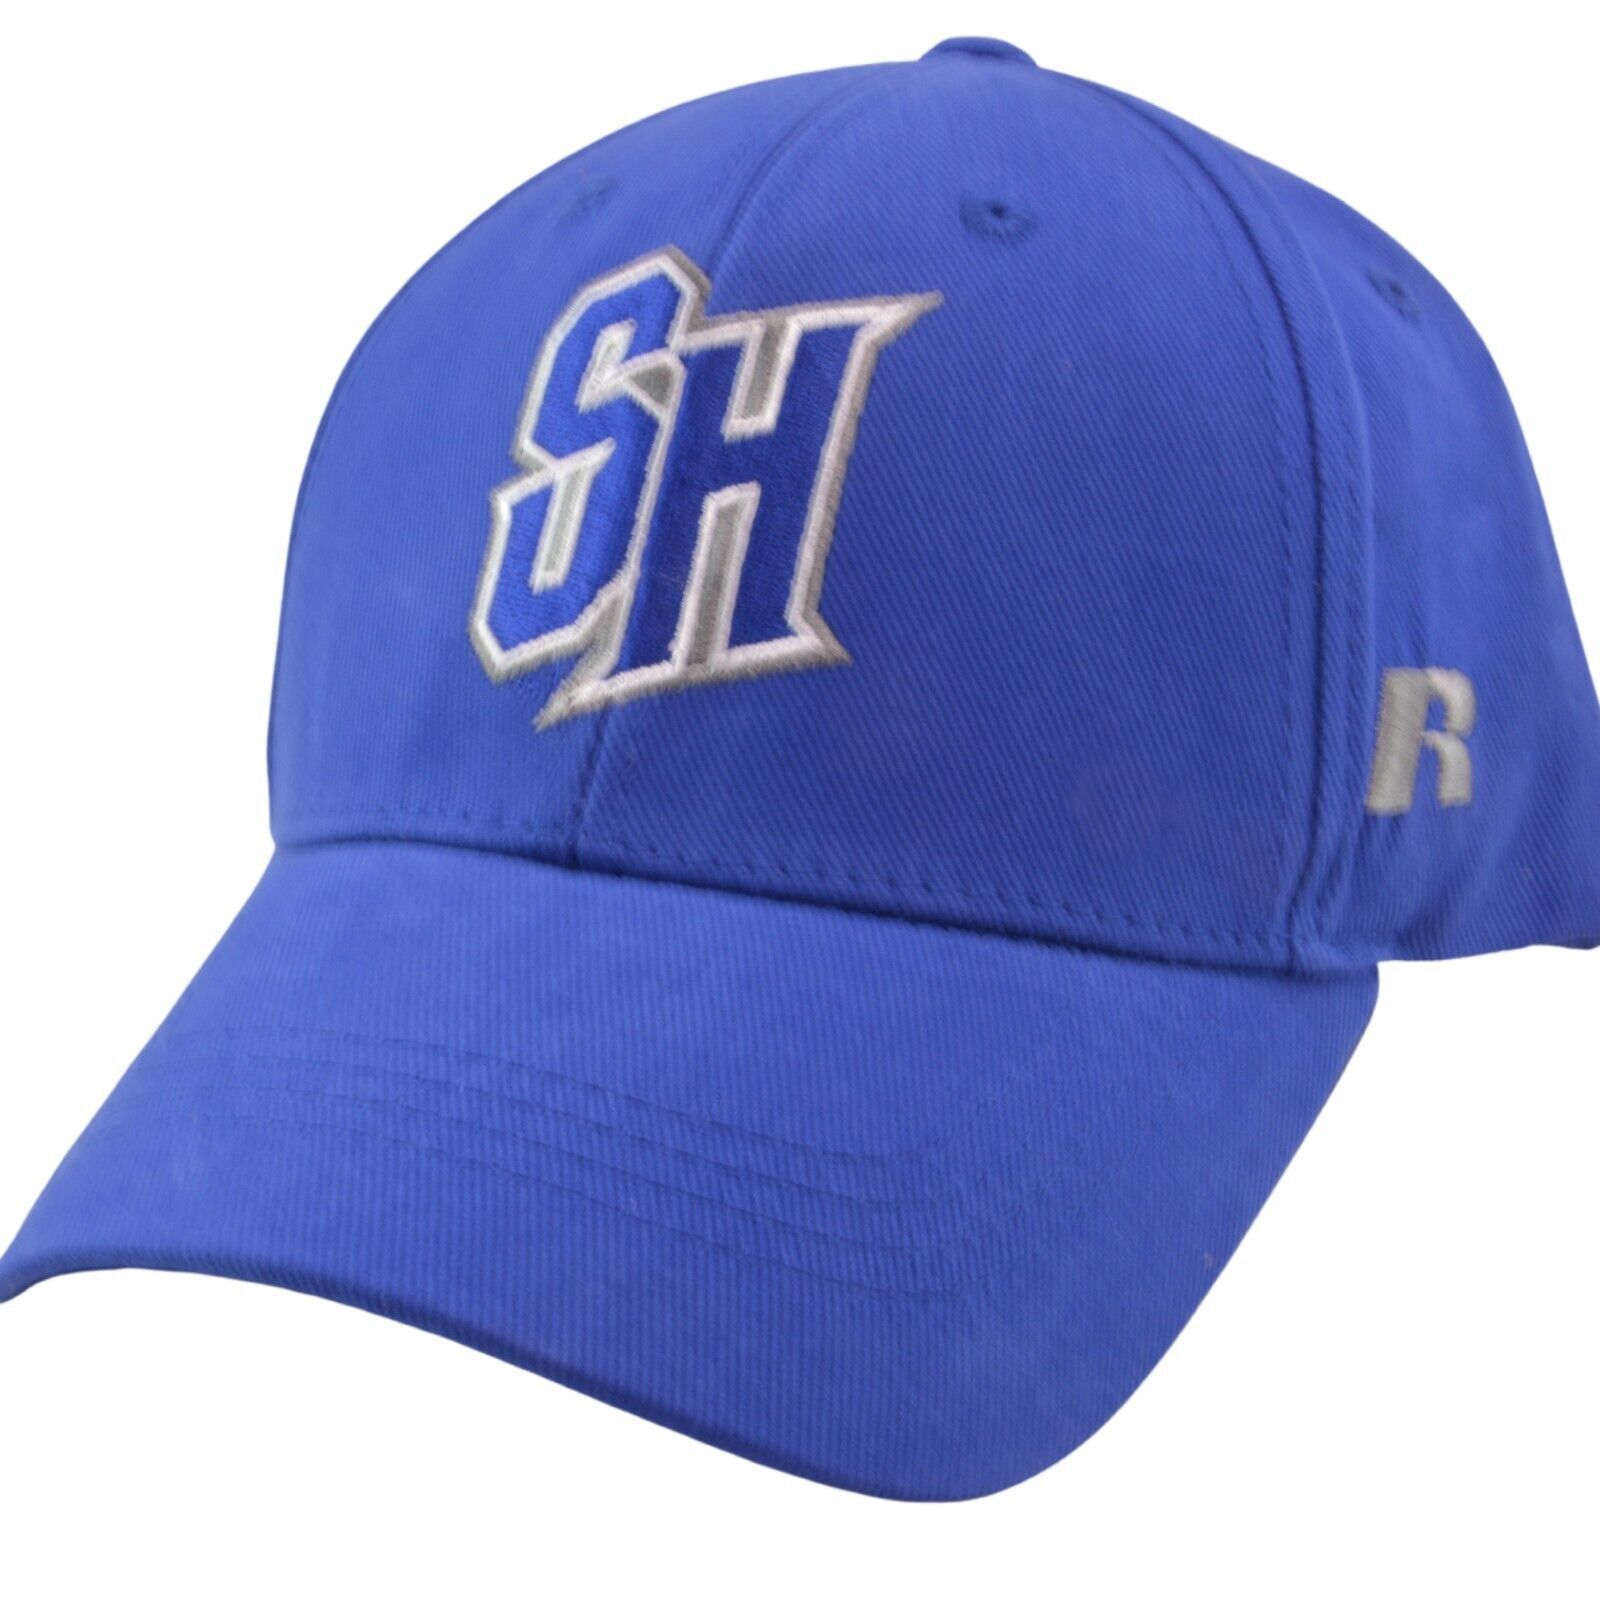 Primary image for Seton Hall Pirates NCAA Russell Athletic Blue Team Logo Adjustable Hat